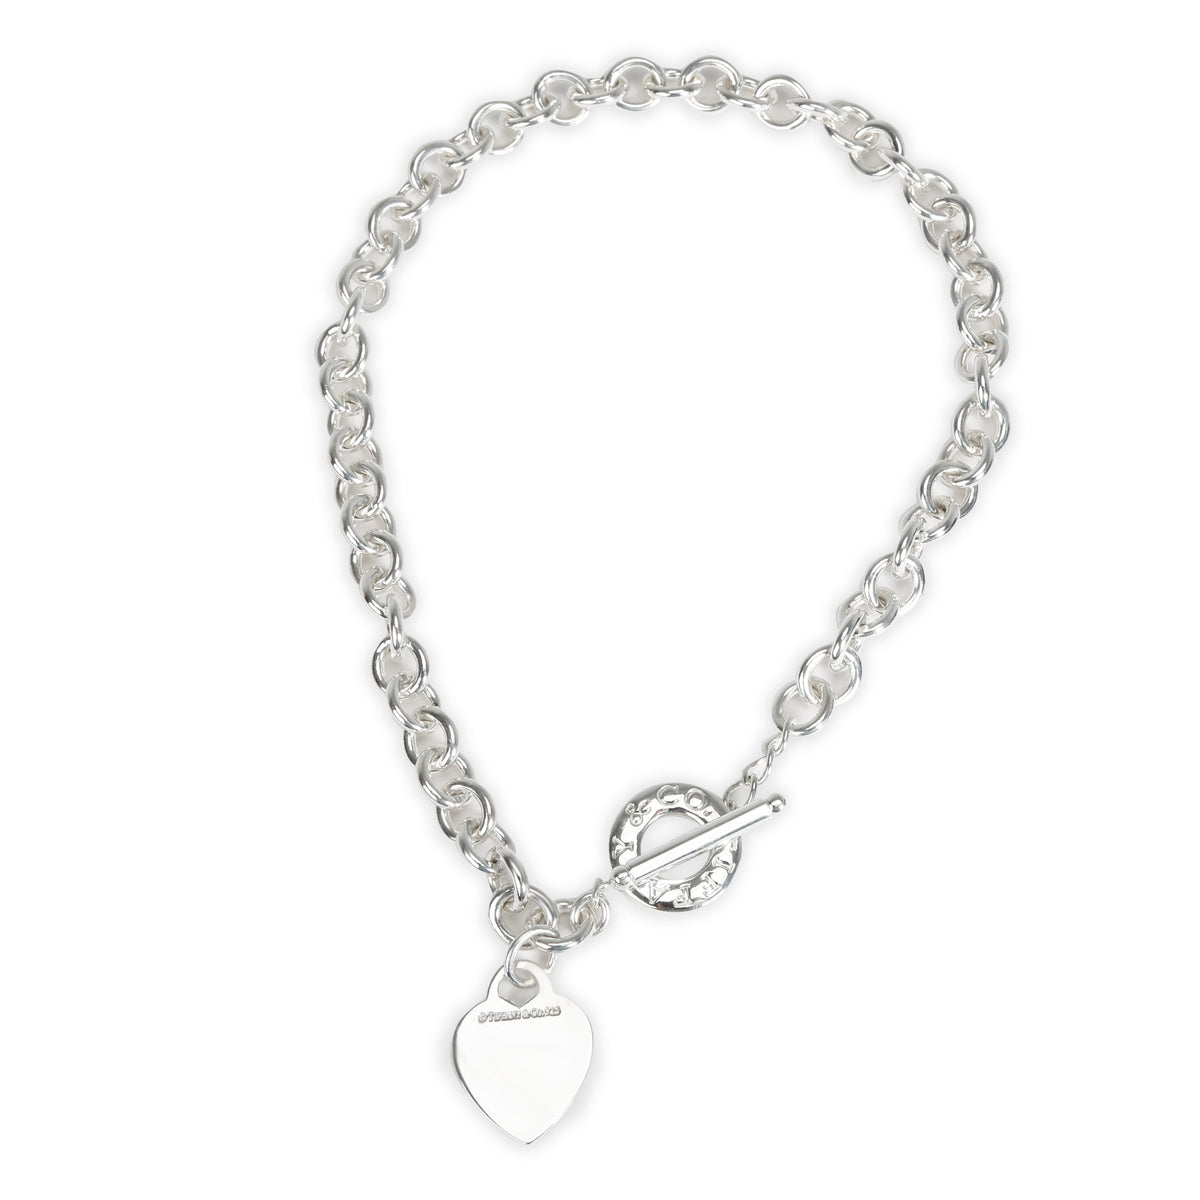 Tiffany & Co. Return To Tiffany Heart Tag Toggle Necklace in Sterling Silver